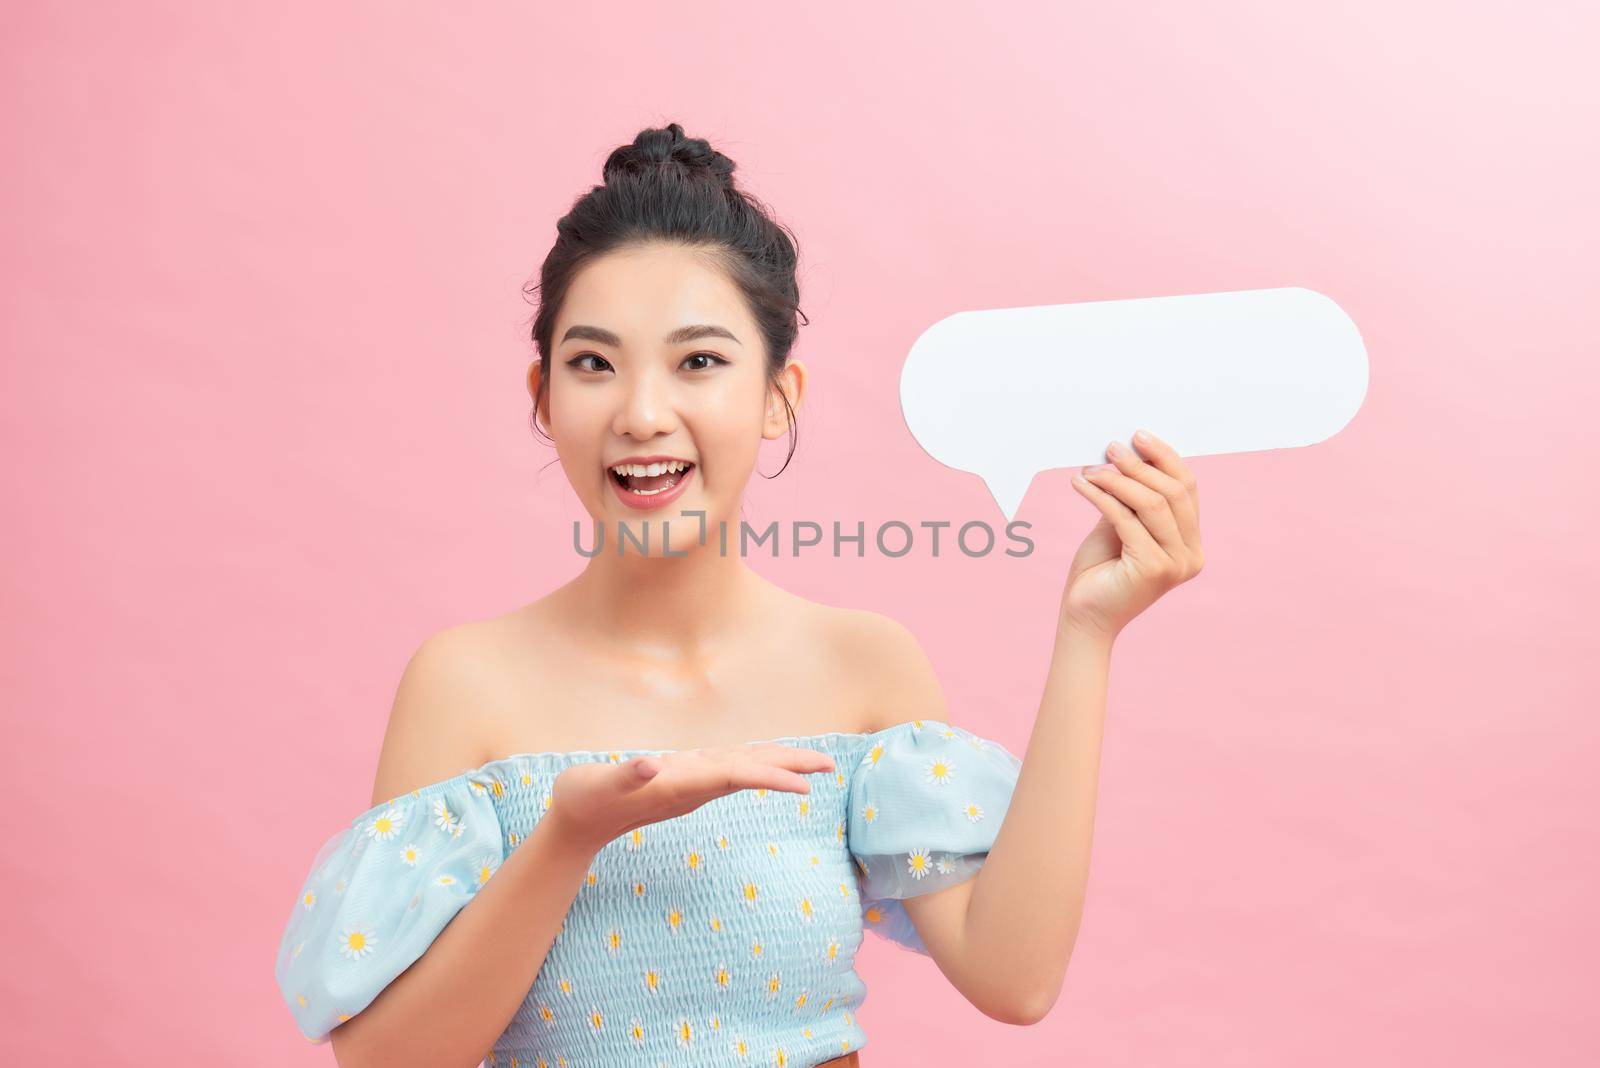 Surprised happy woman holding blank speech bubble and looking at the camera over pink background by makidotvn